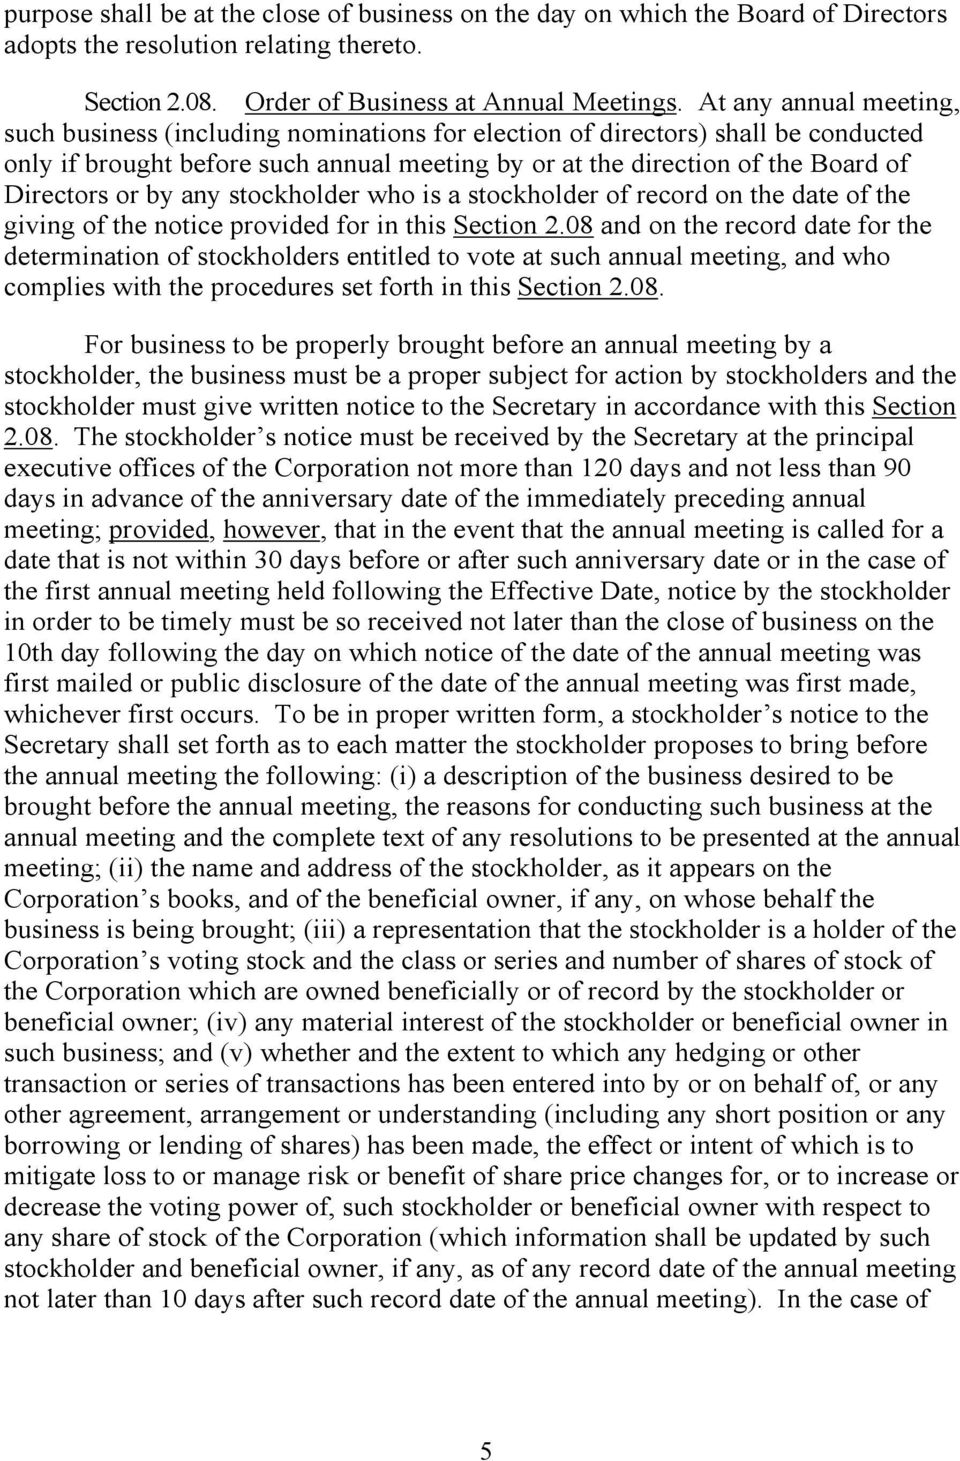 or by any stockholder who is a stockholder of record on the date of the giving of the notice provided for in this Section 2.